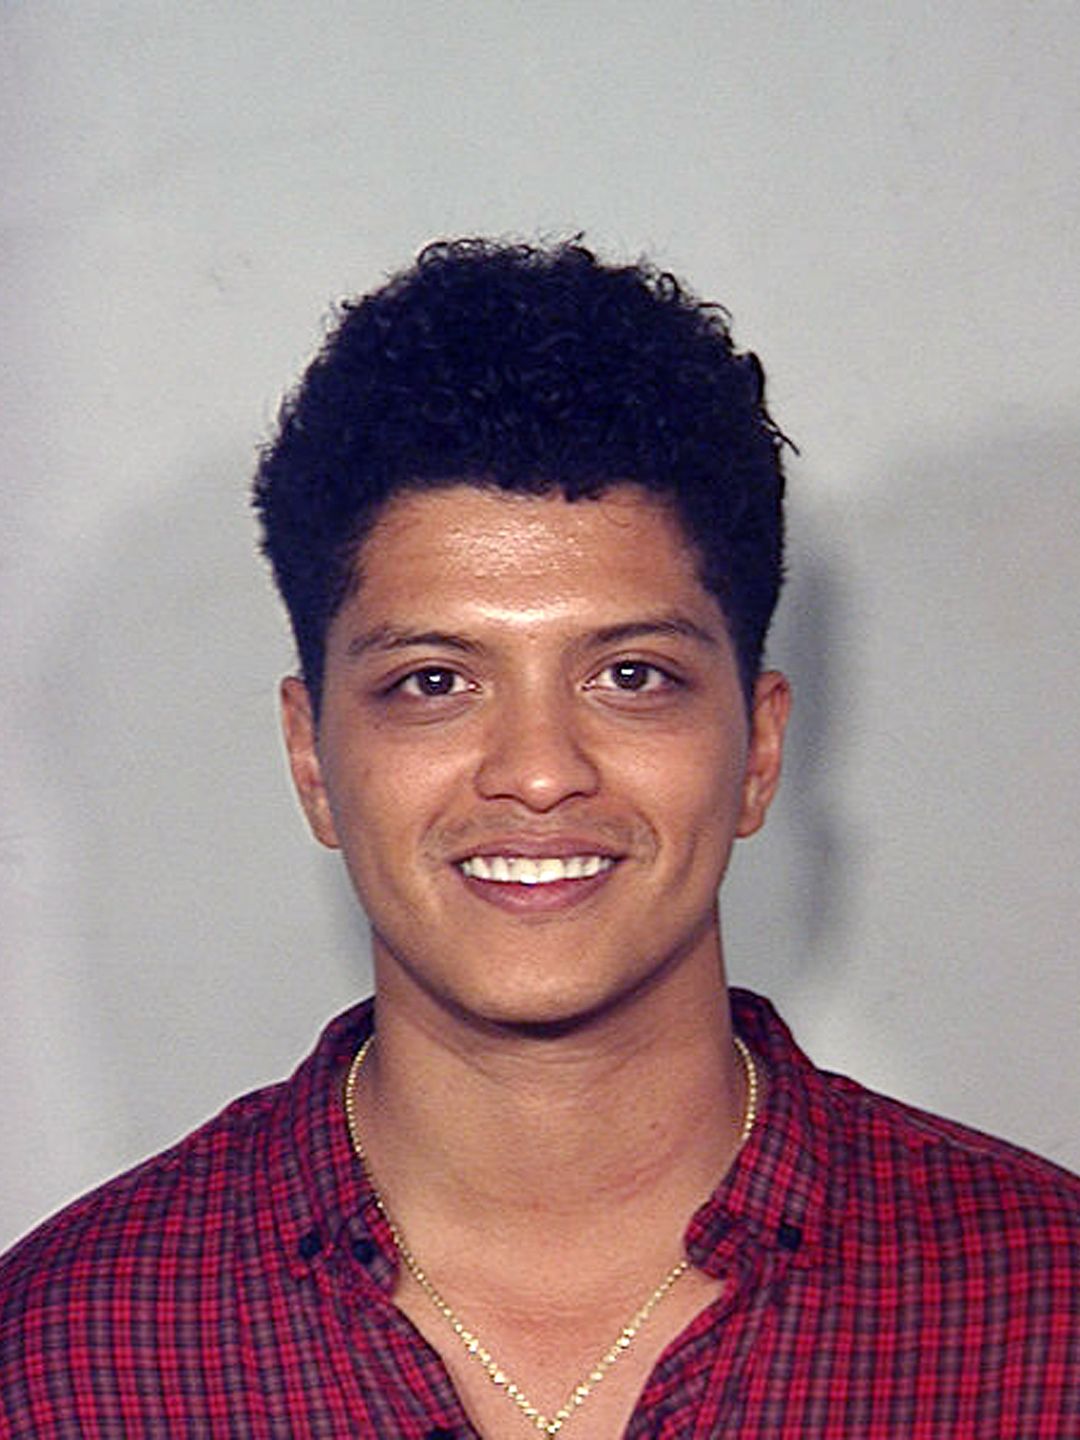 Bruno Mars in a red plaid shirt and necklace for a mugshot